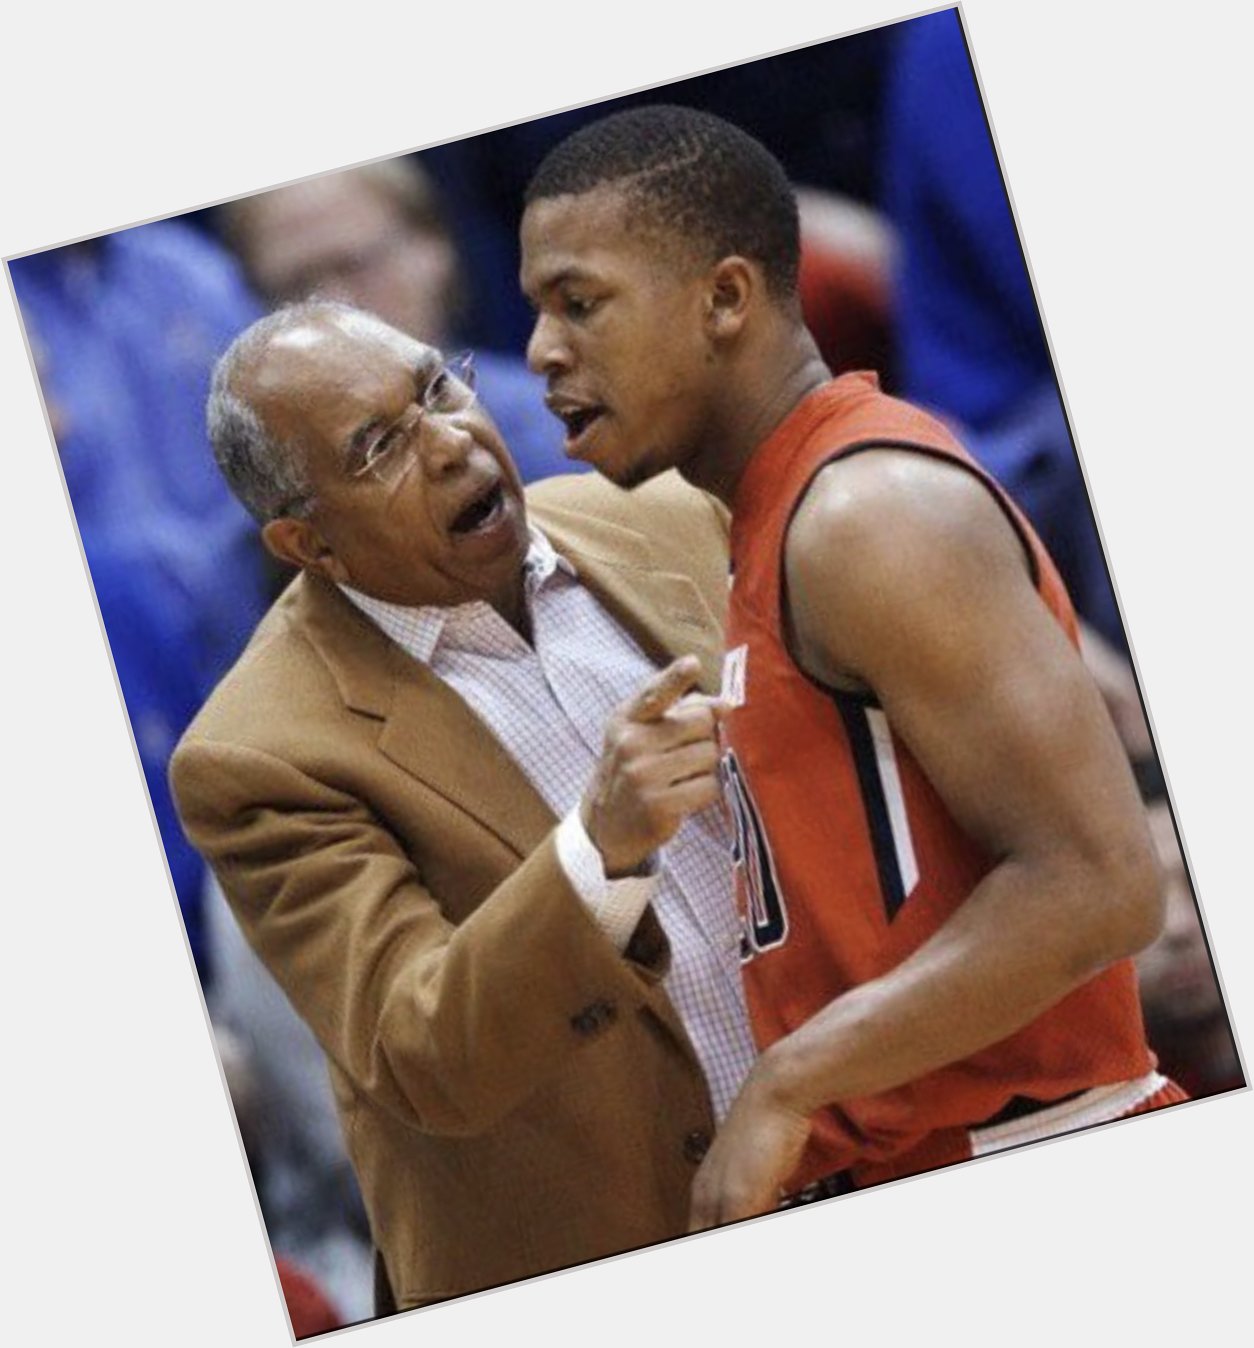 Happy Birthday to Coach Tubby Smith! Changed my life in many ways and just grateful for what he has done 